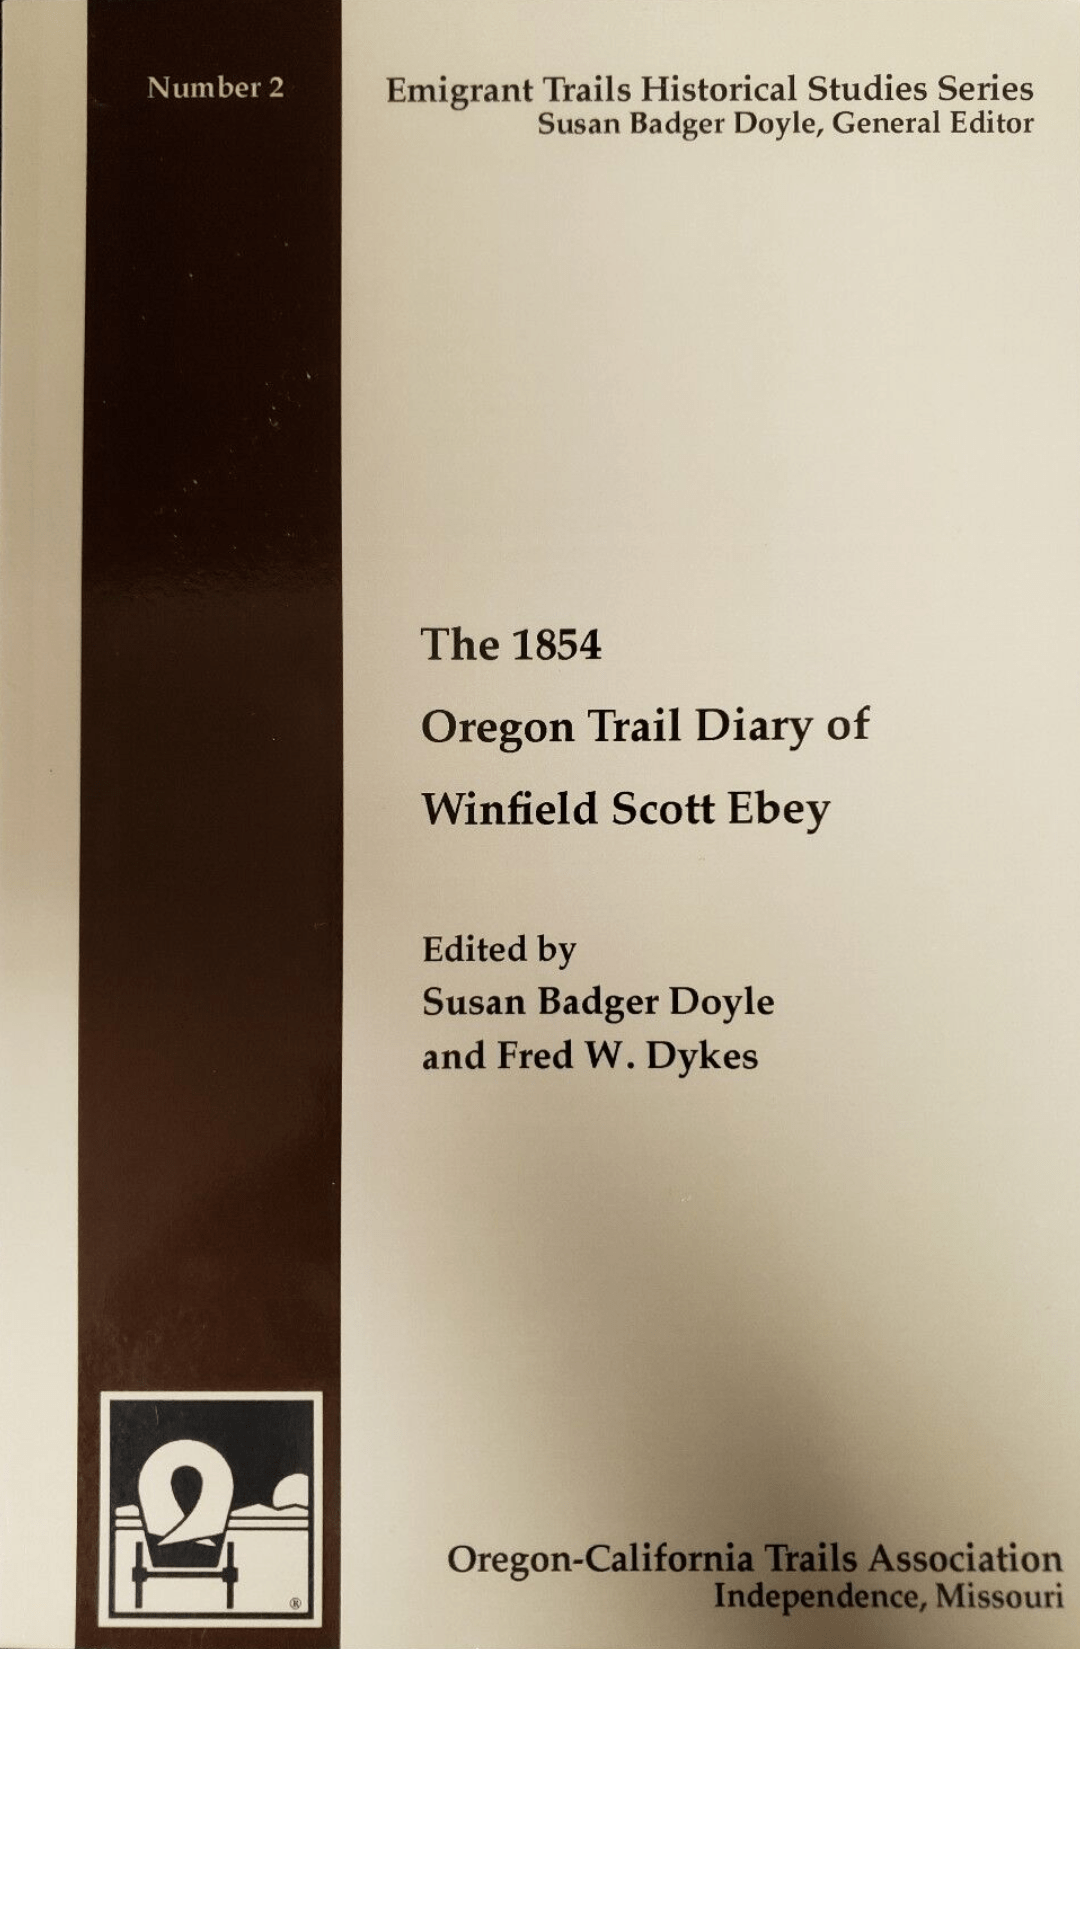 The 1854 Oregon Trail Diary of Winfield Scott Ebey